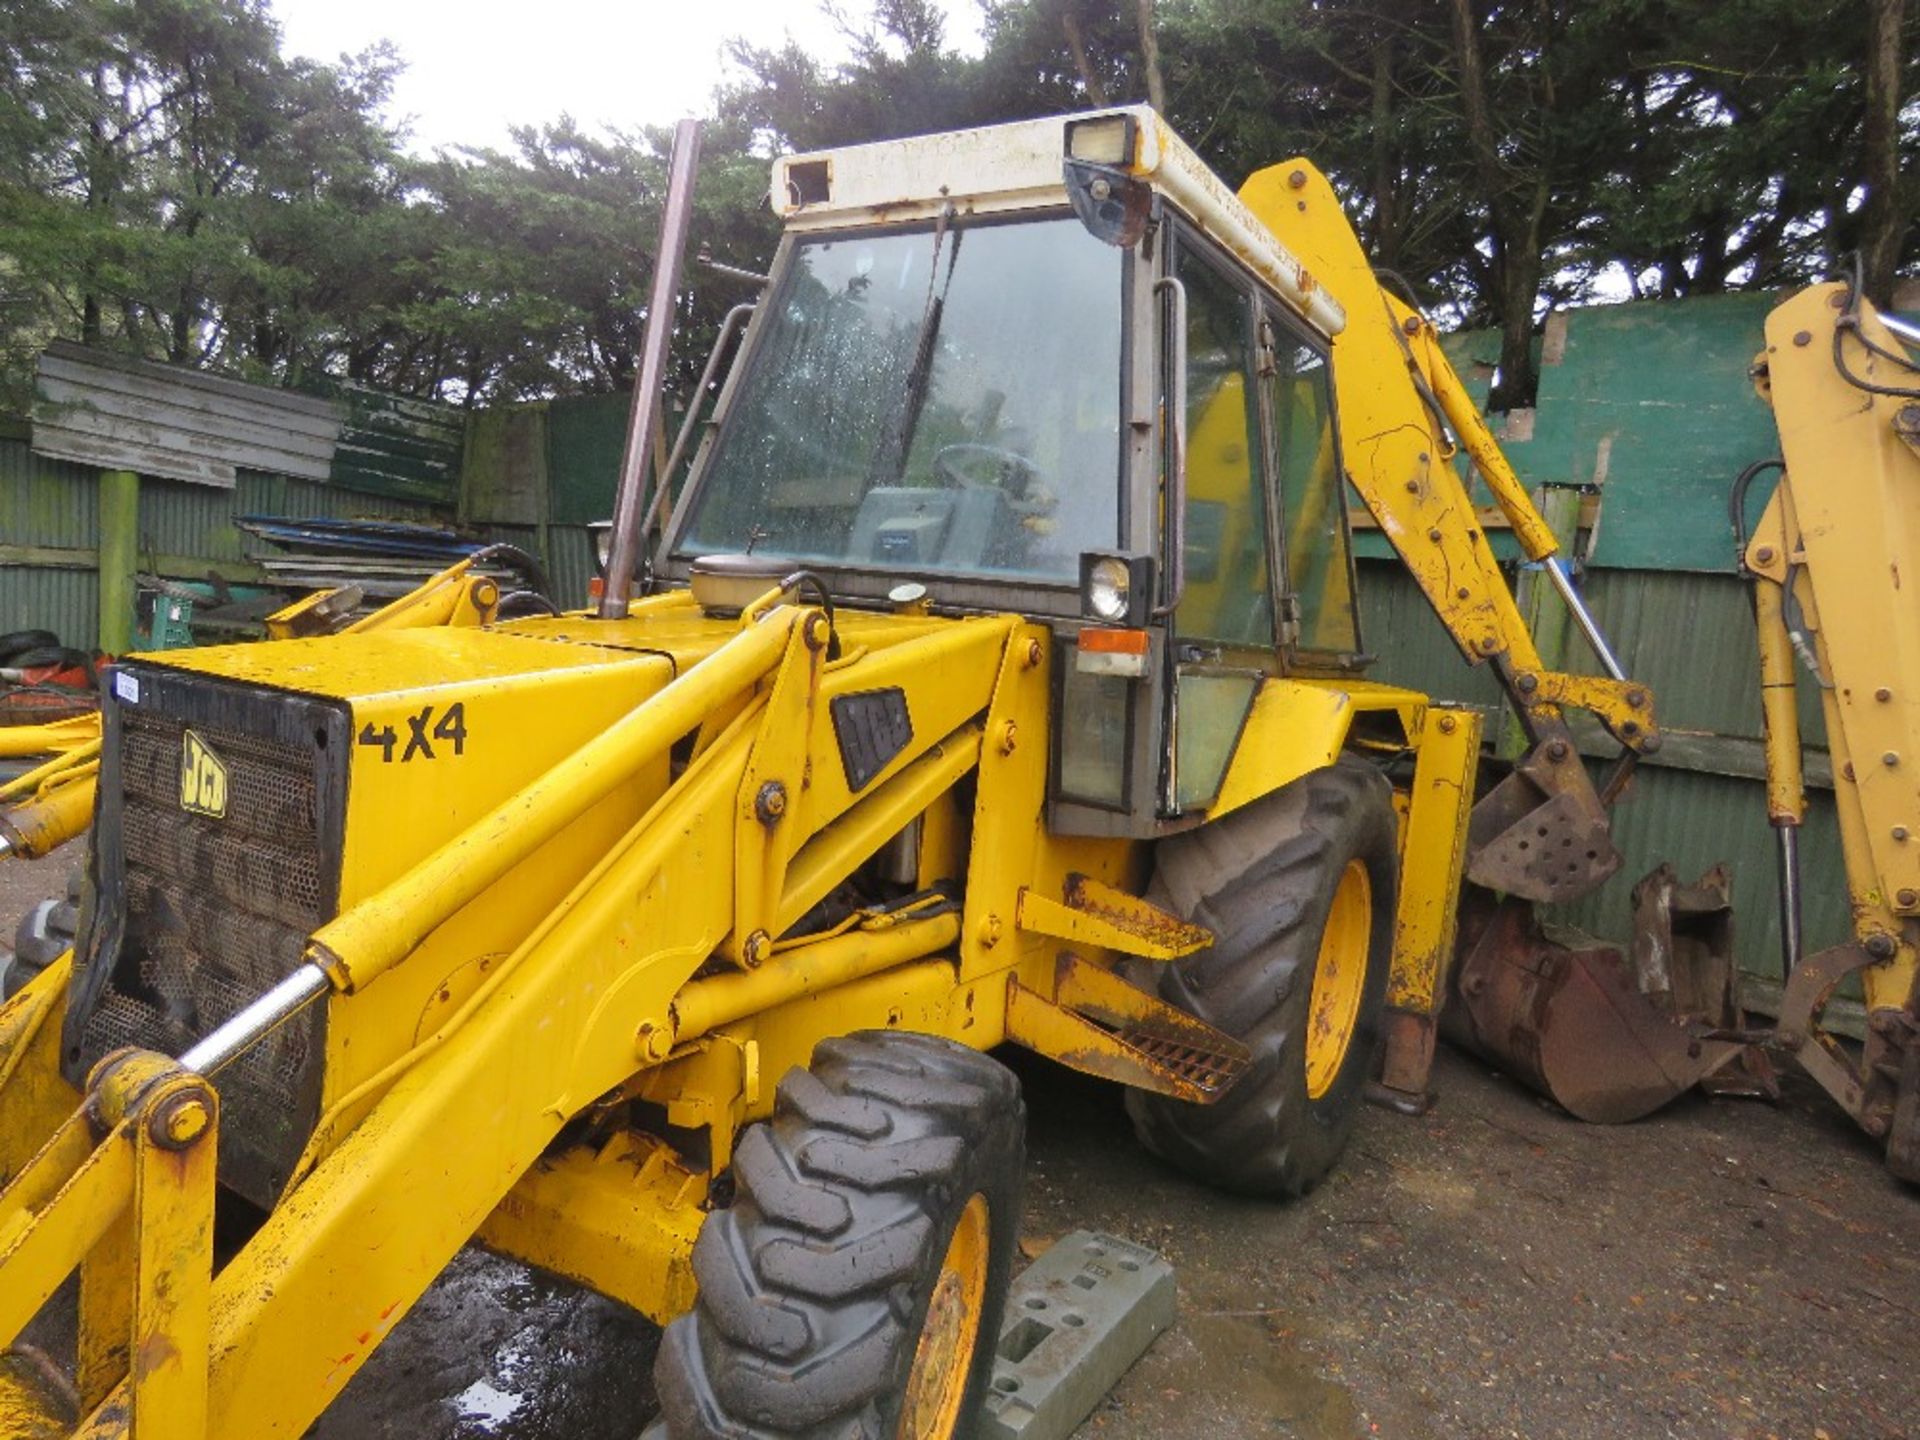 JCB 3CX SITEMASTER BACKHOE LOADER REG:F539 SDE. TYPE 3CX-4/34 SN:509602.F. WITH 4 IN 1 BUCKET PLUS - Image 6 of 7